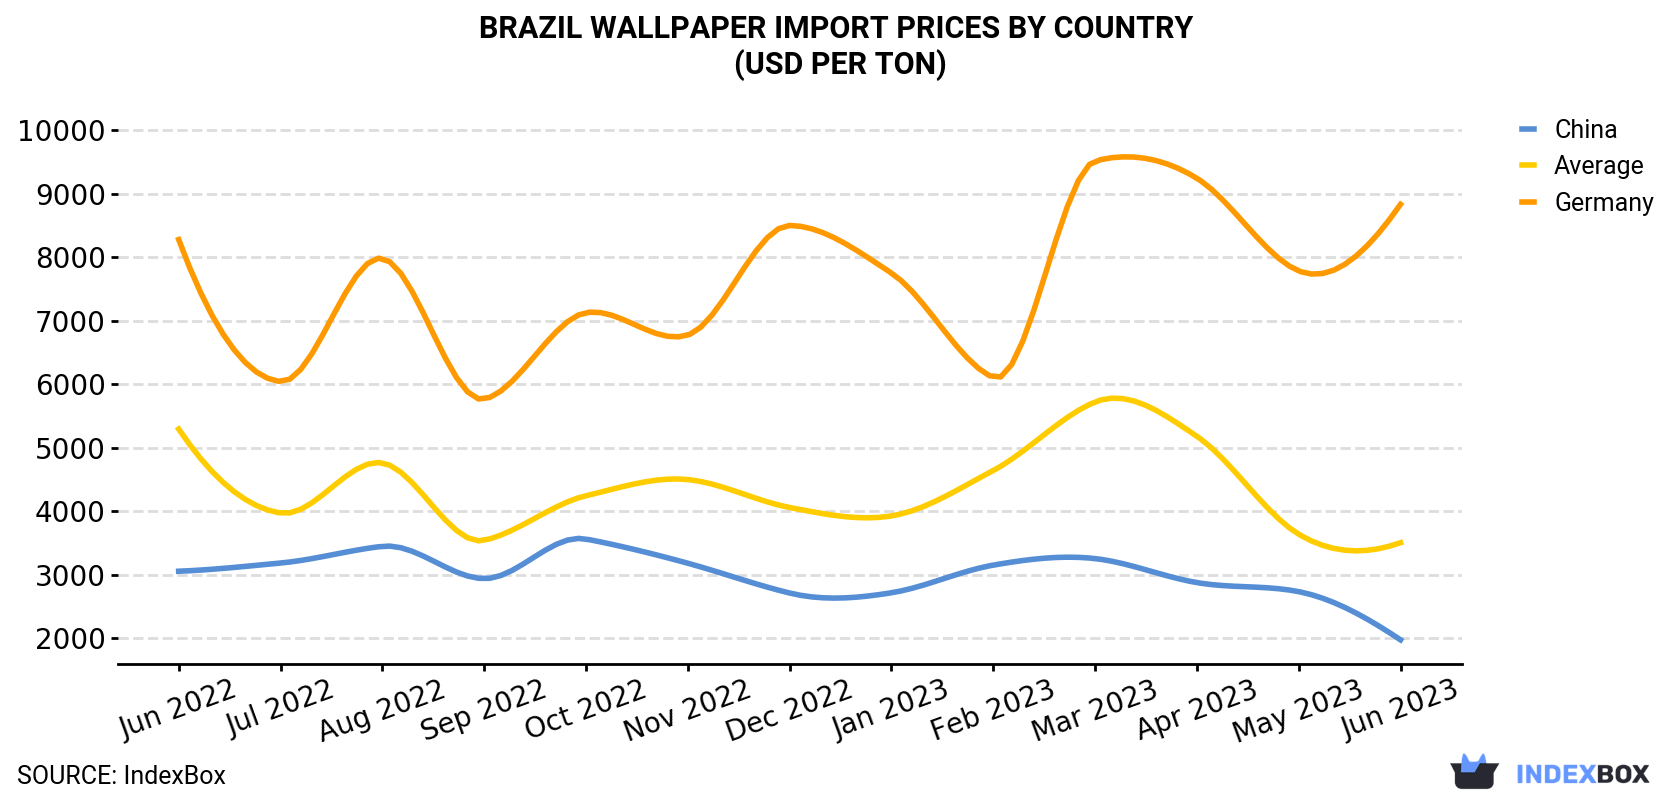 Brazil Wallpaper Import Prices By Country (USD Per Ton)